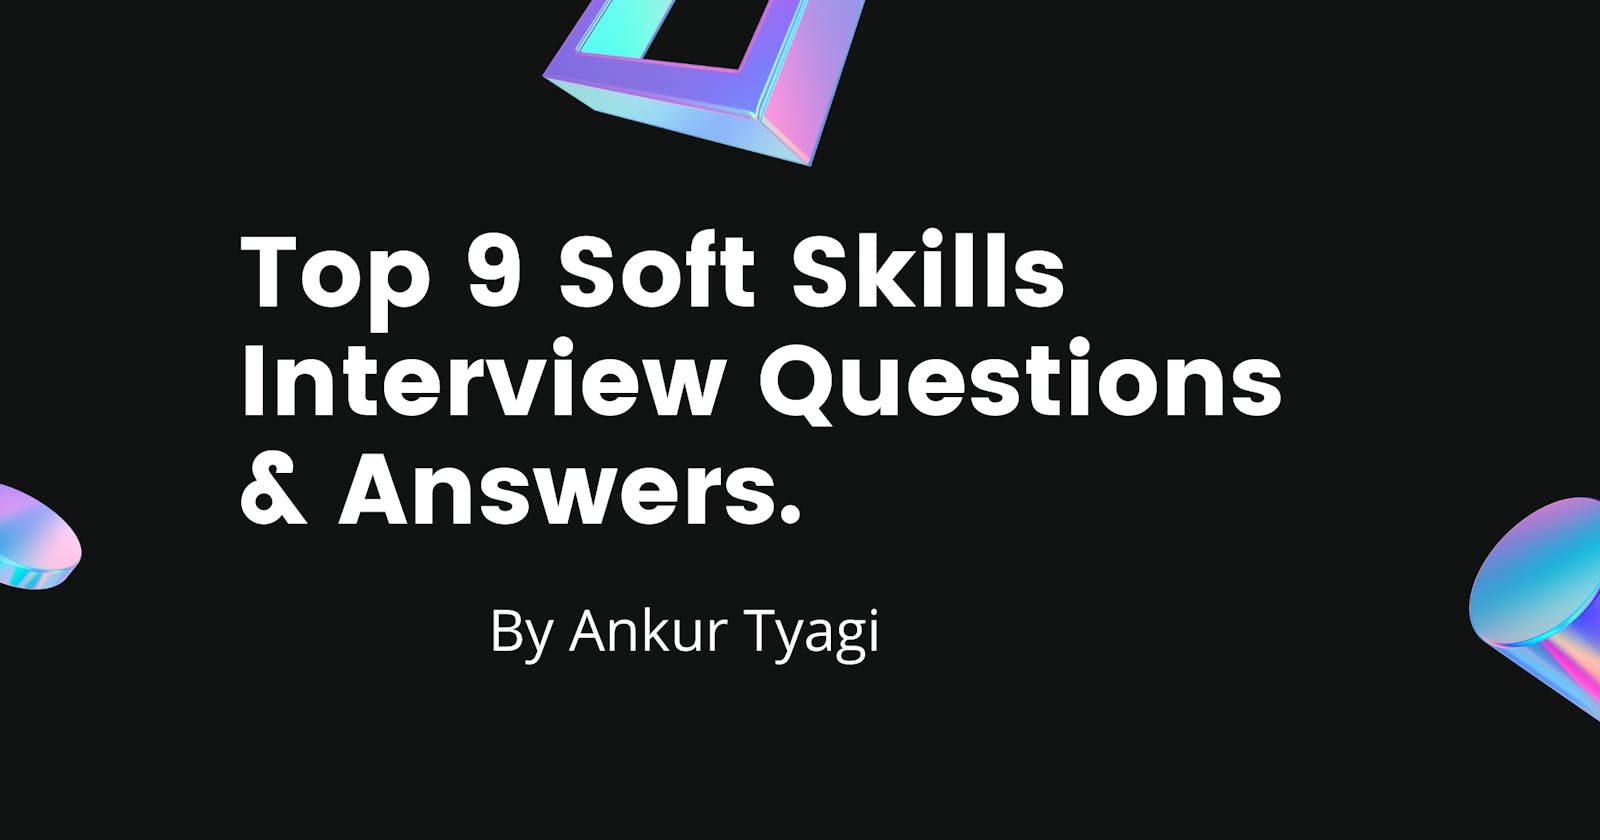 Top 9 Soft Skills Interview Questions & Answers.